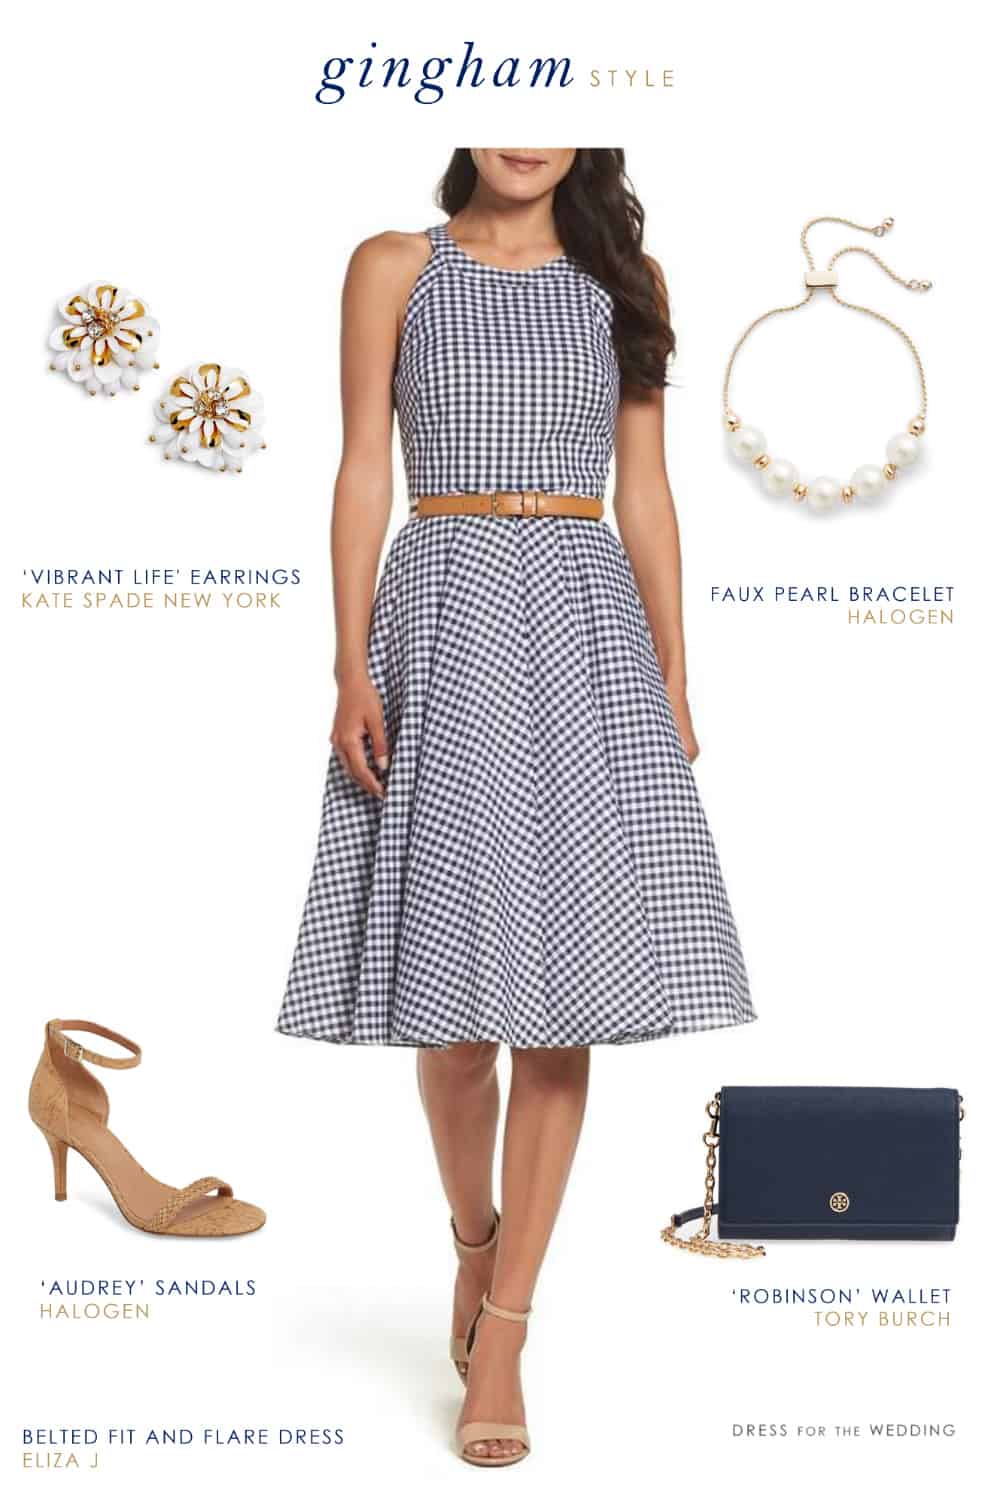 How to Style a Cute Gingham Dress ...